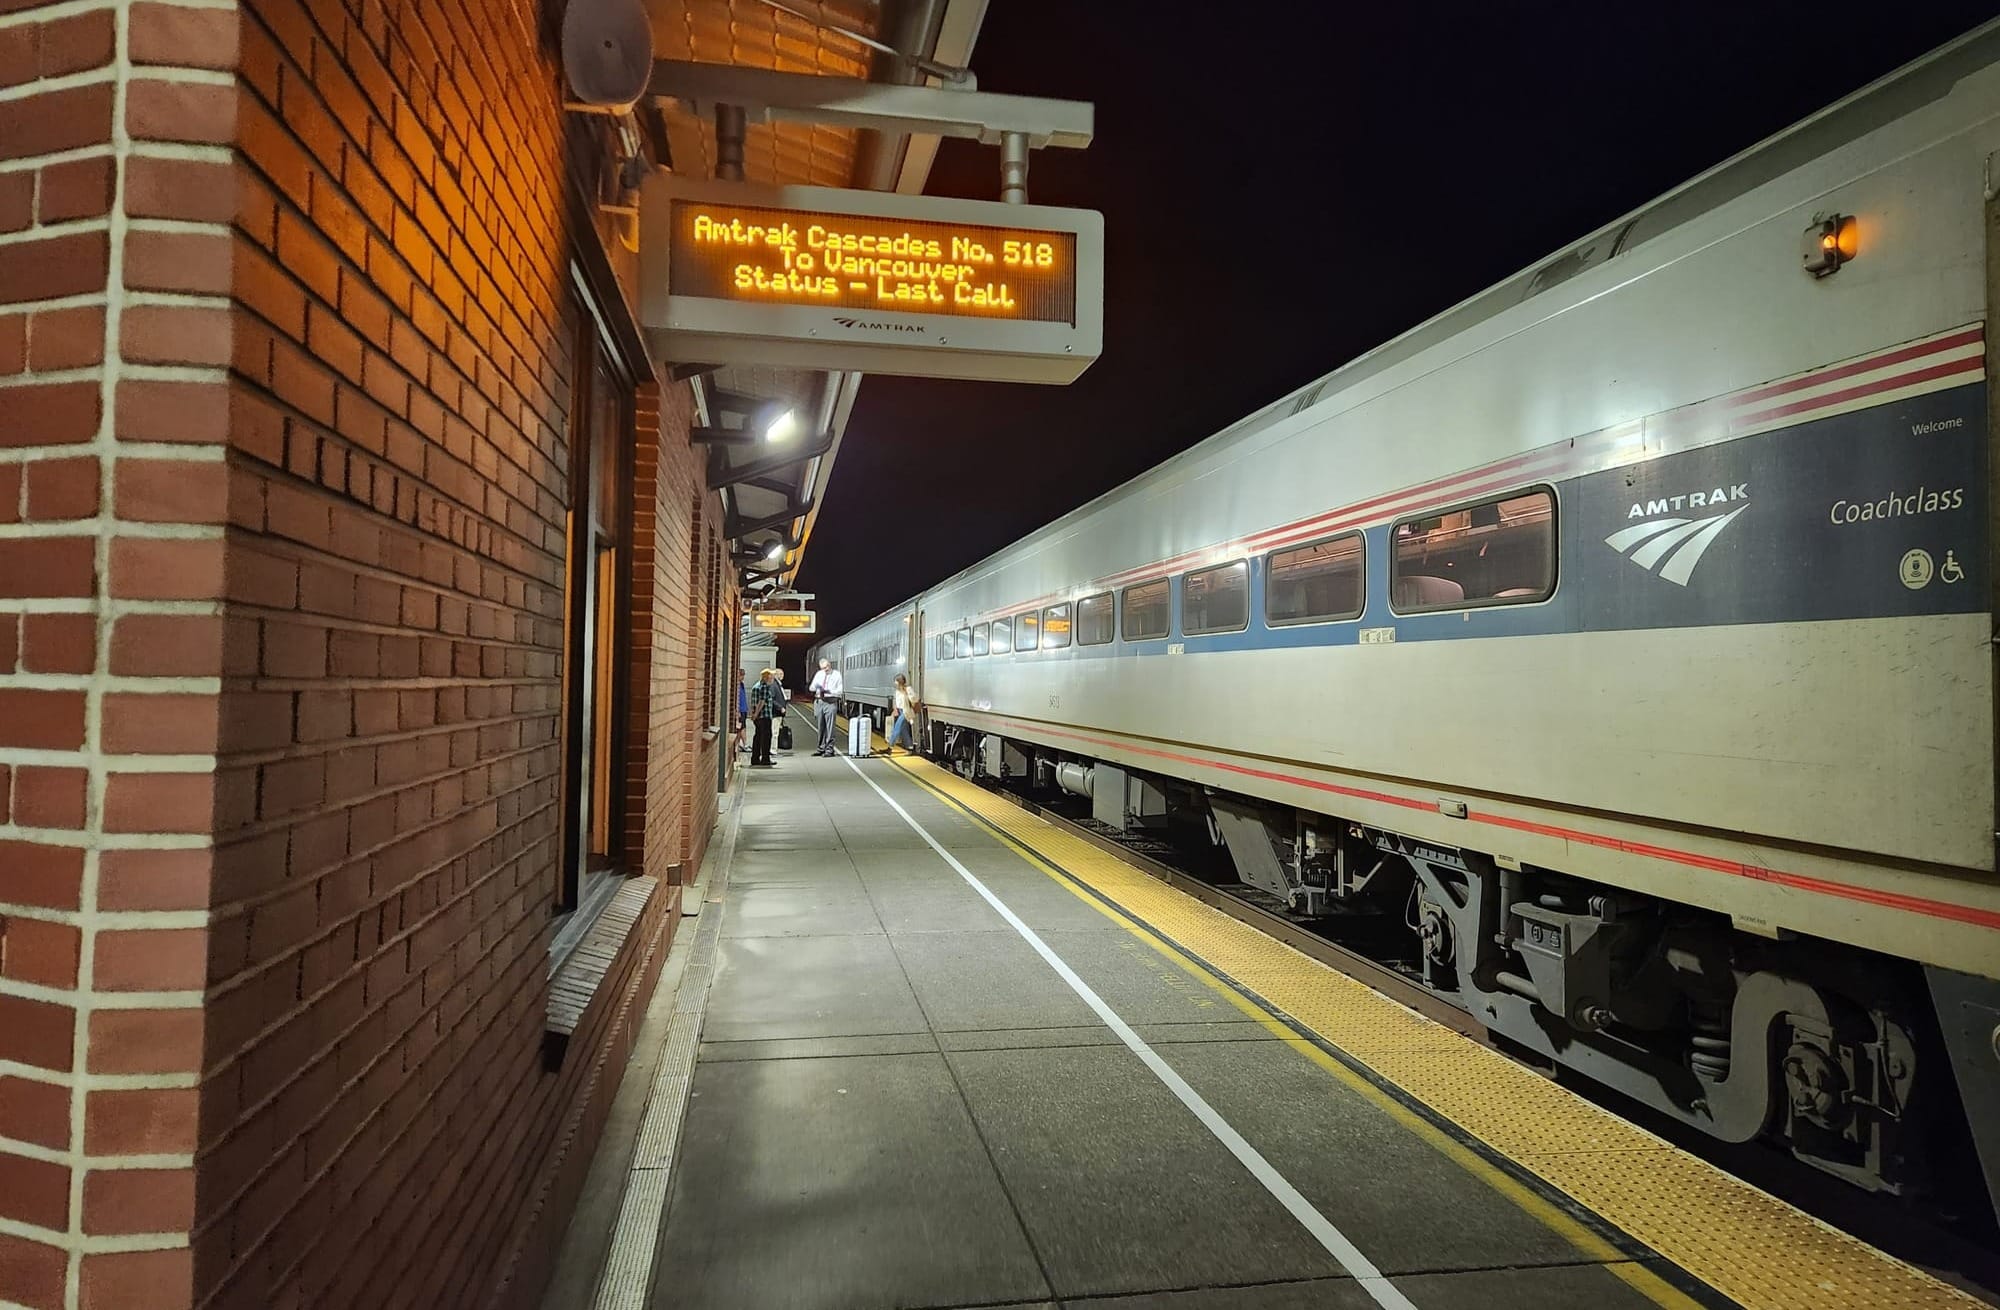 An Amtrak Cascades train at a train platform with a digital sign that reads "Amtrak Cascades No. 518 / To Vancouver / Status - Last Call"